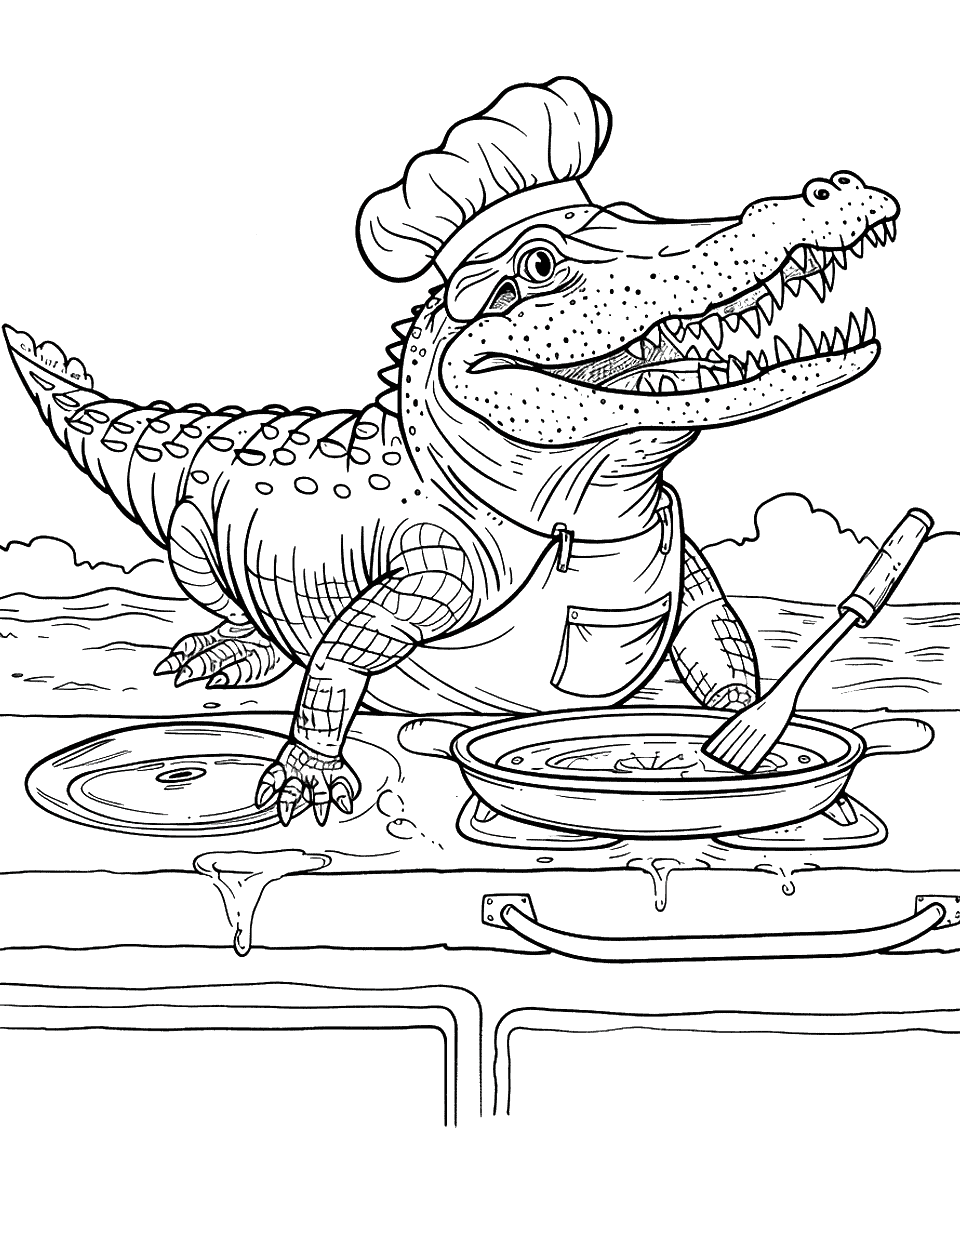 Crocodile as a Chef Coloring Page - A crocodile wearing a chef’s hat and apron, cooking over a stove.